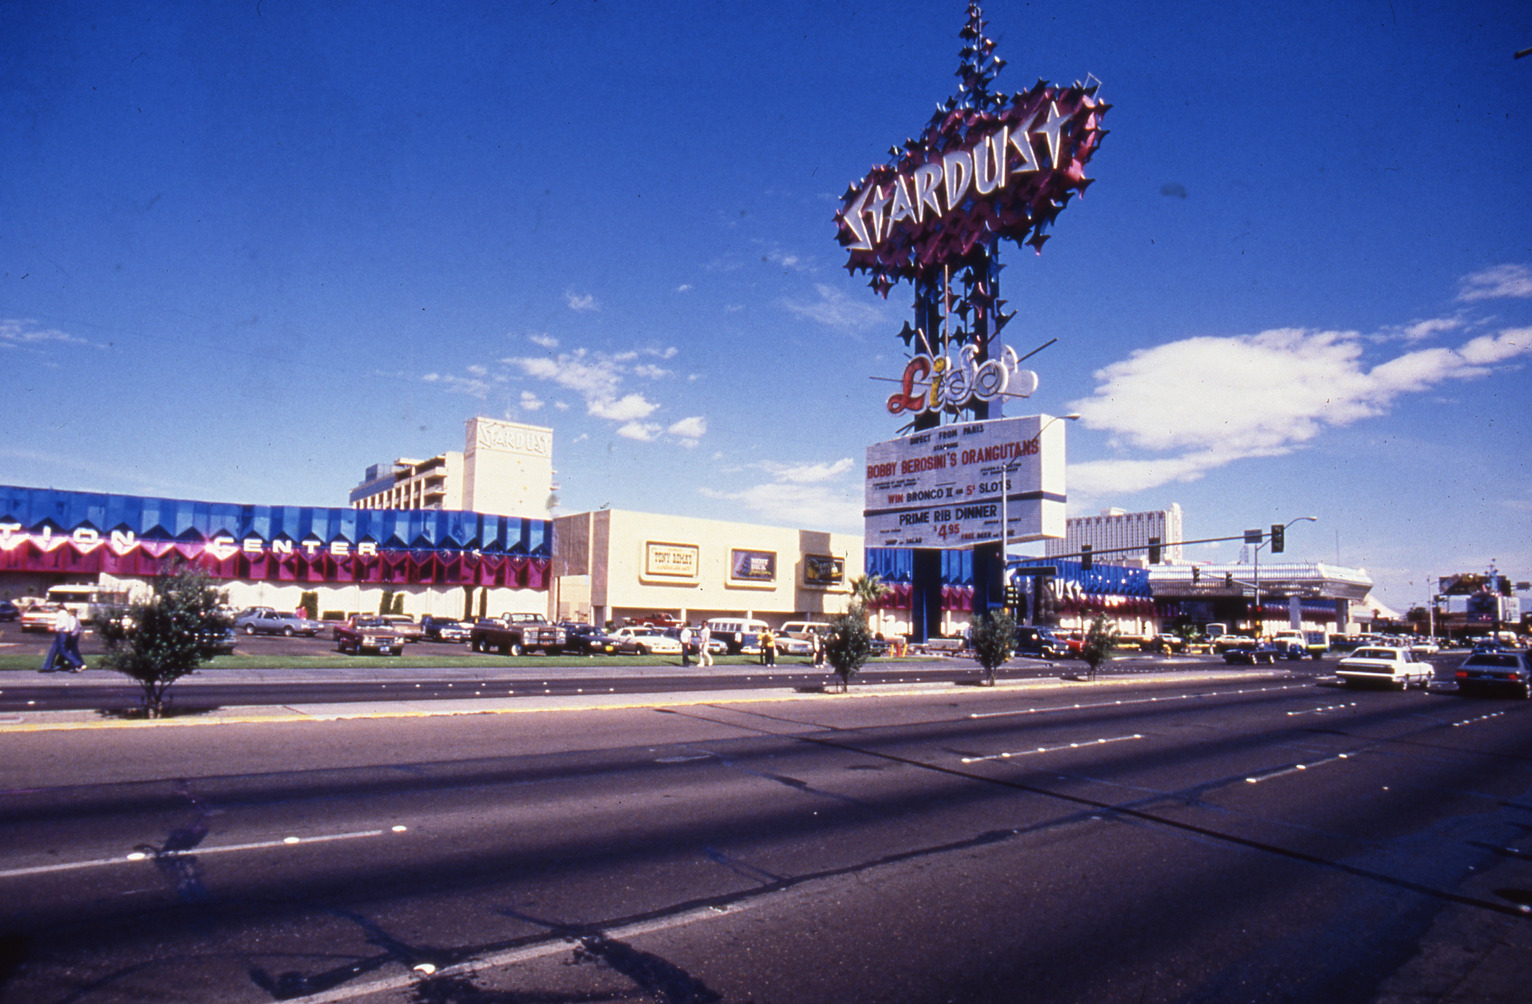 Stardust Resort and Casino double mounted pylon, marquee, and wall signs, Las Vegas, Nevada: photographic print